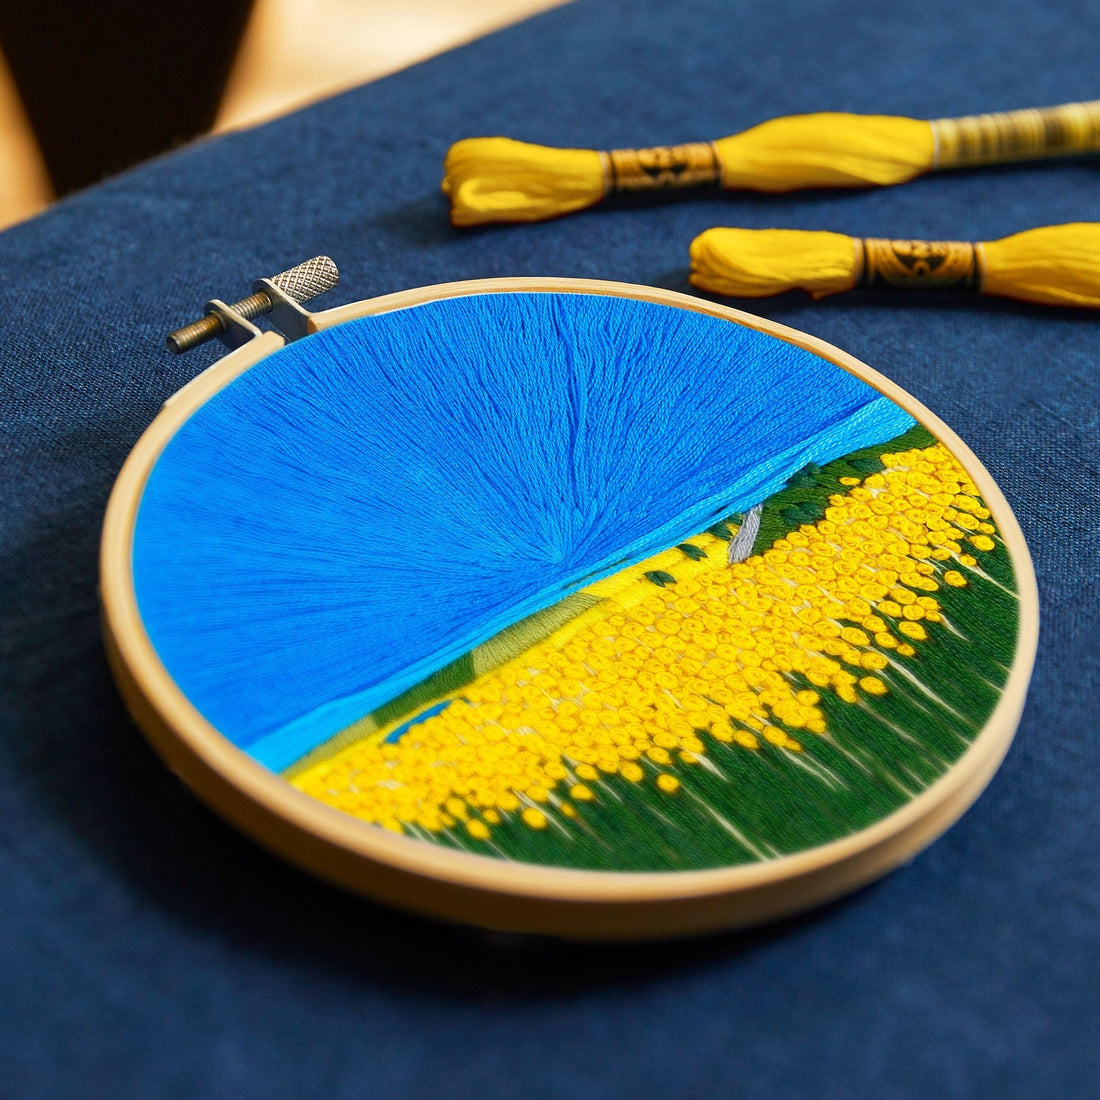  DMC Embroidery Kit with Hoop: Sunflower Fields - MakeBox & Co.